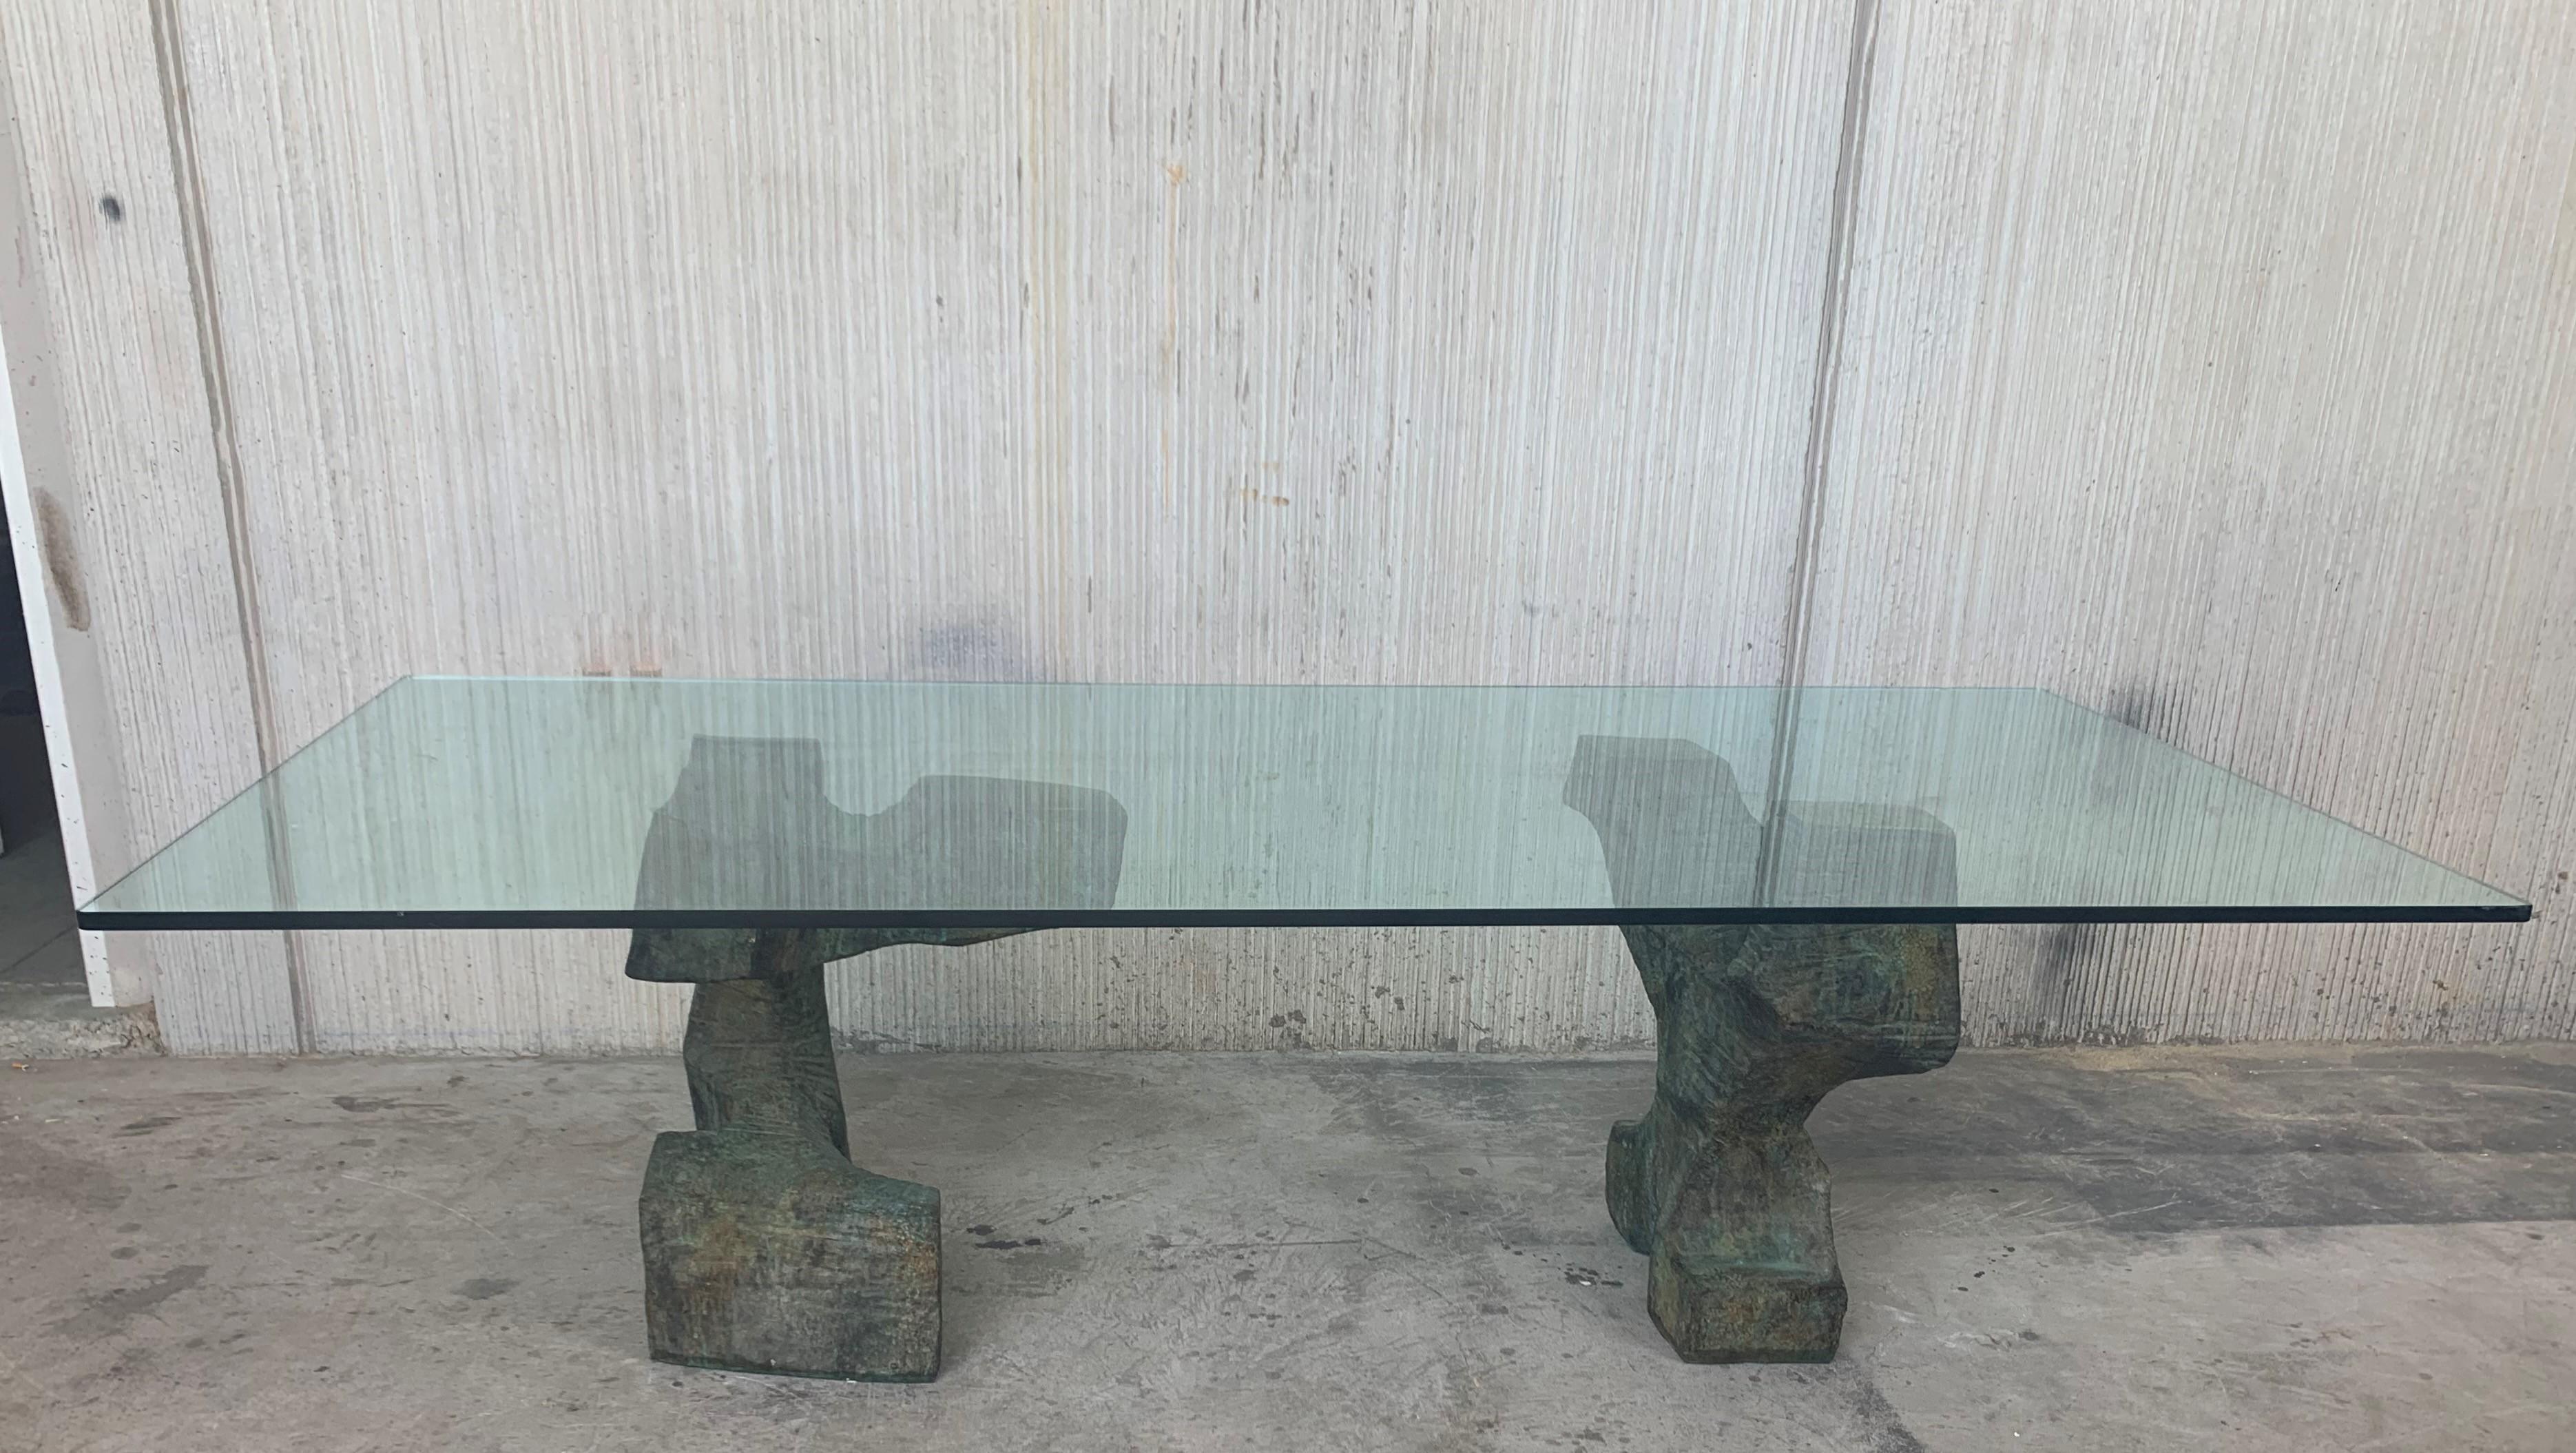 20th Century Exceptional Sculpted Pedestals in Bronze, Modern Dining Table by Valenti, Spain